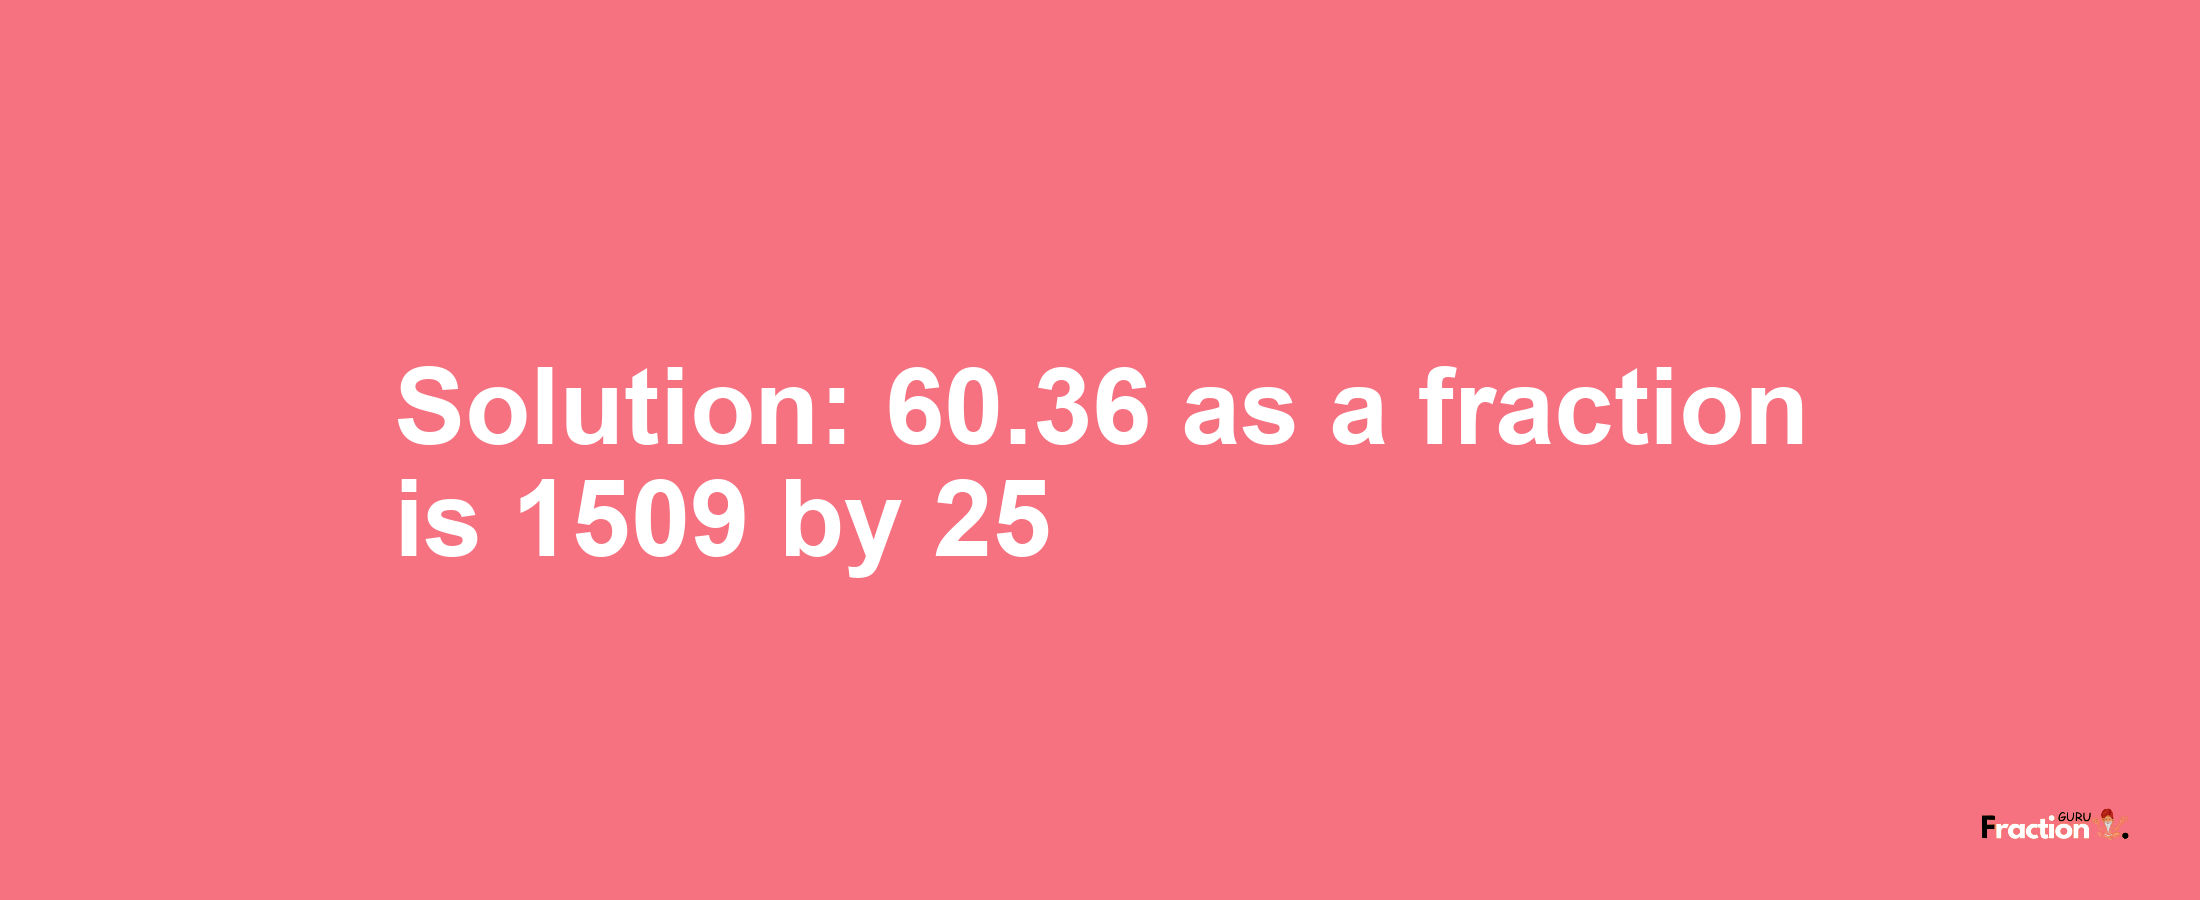 Solution:60.36 as a fraction is 1509/25